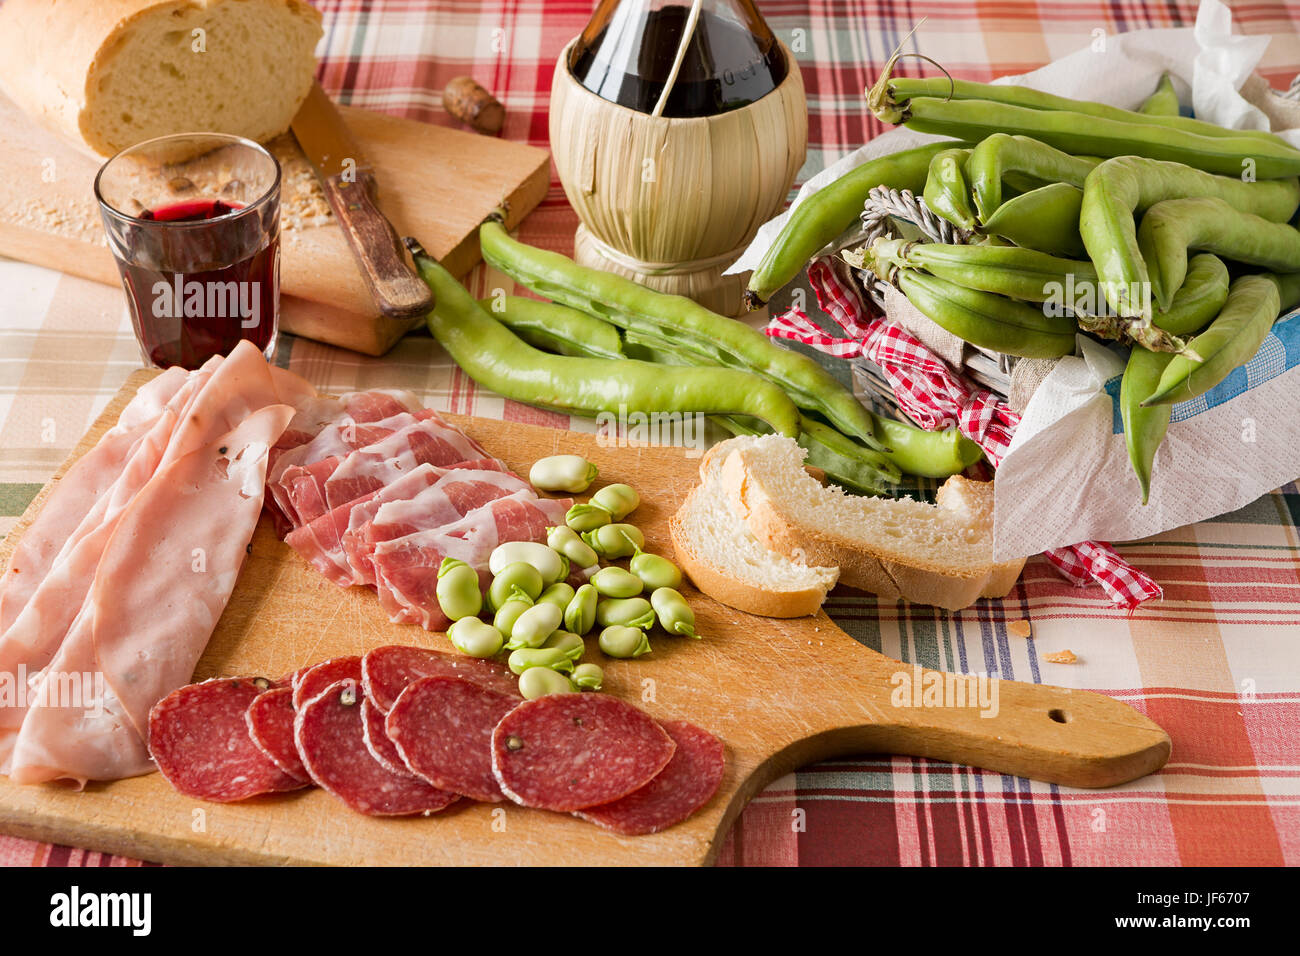 Chopping board of cold meats and broad bean Stock Photo